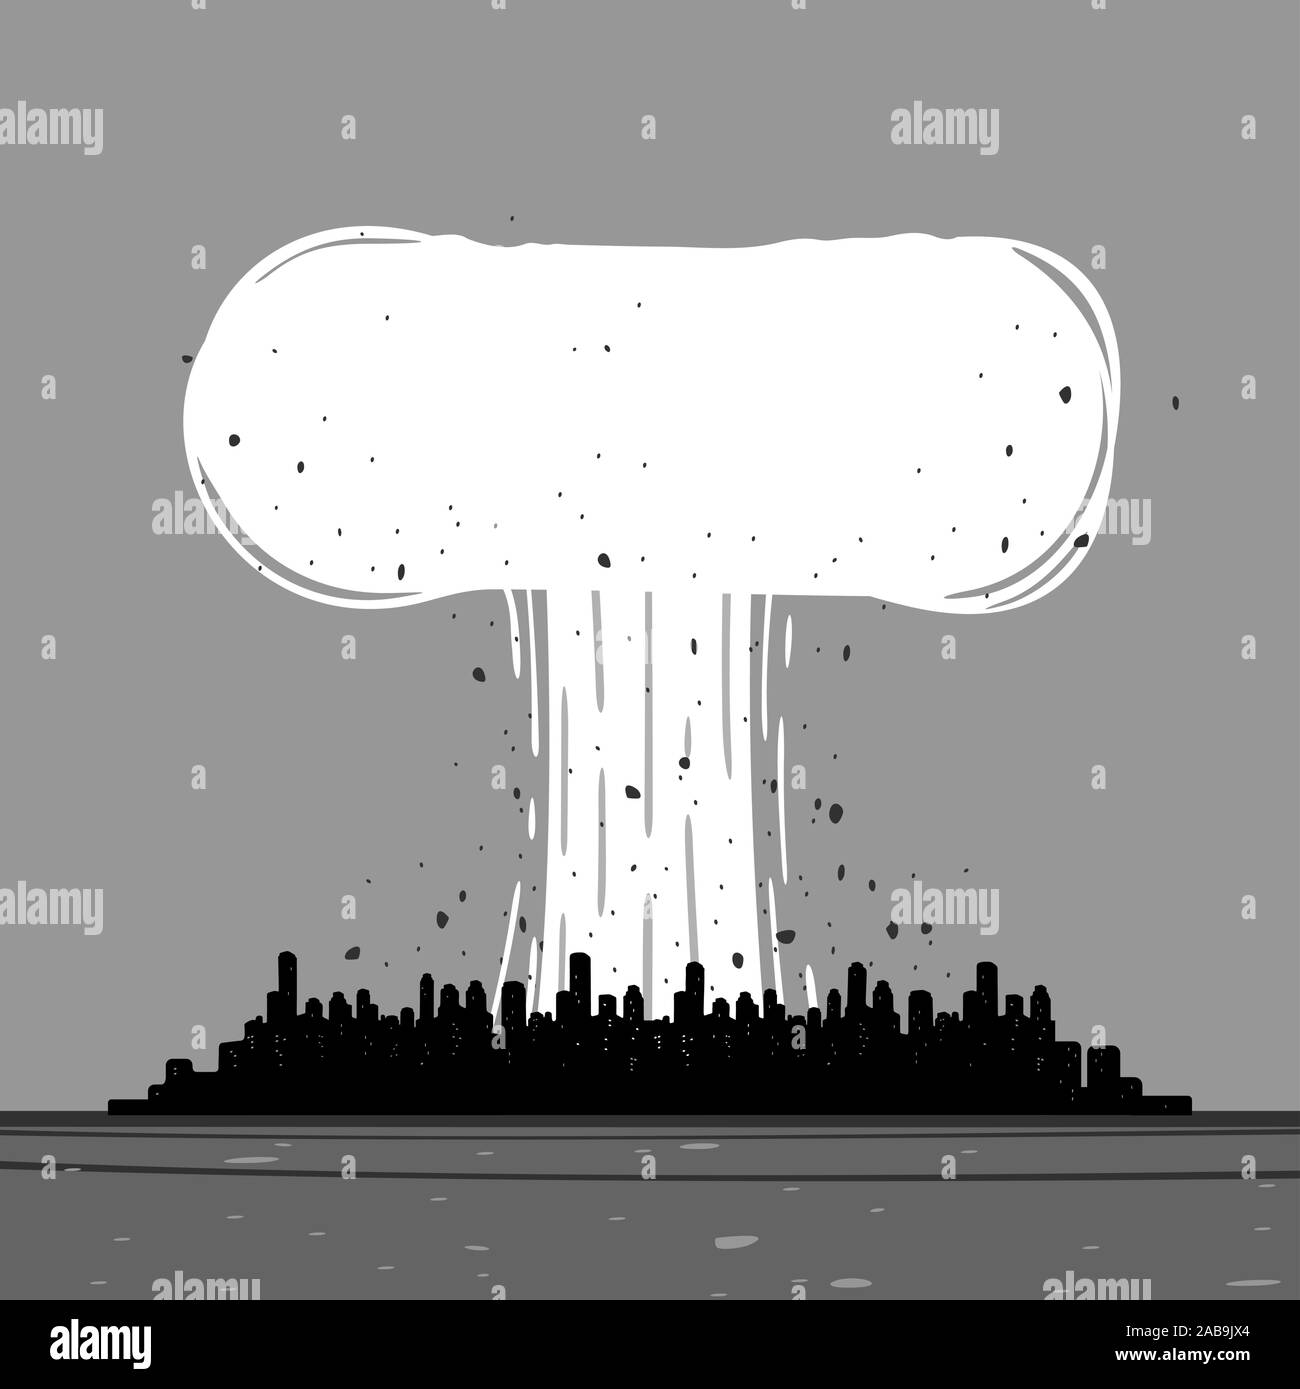 Vector illustration of a nuclear explosion in the City Stock Vector